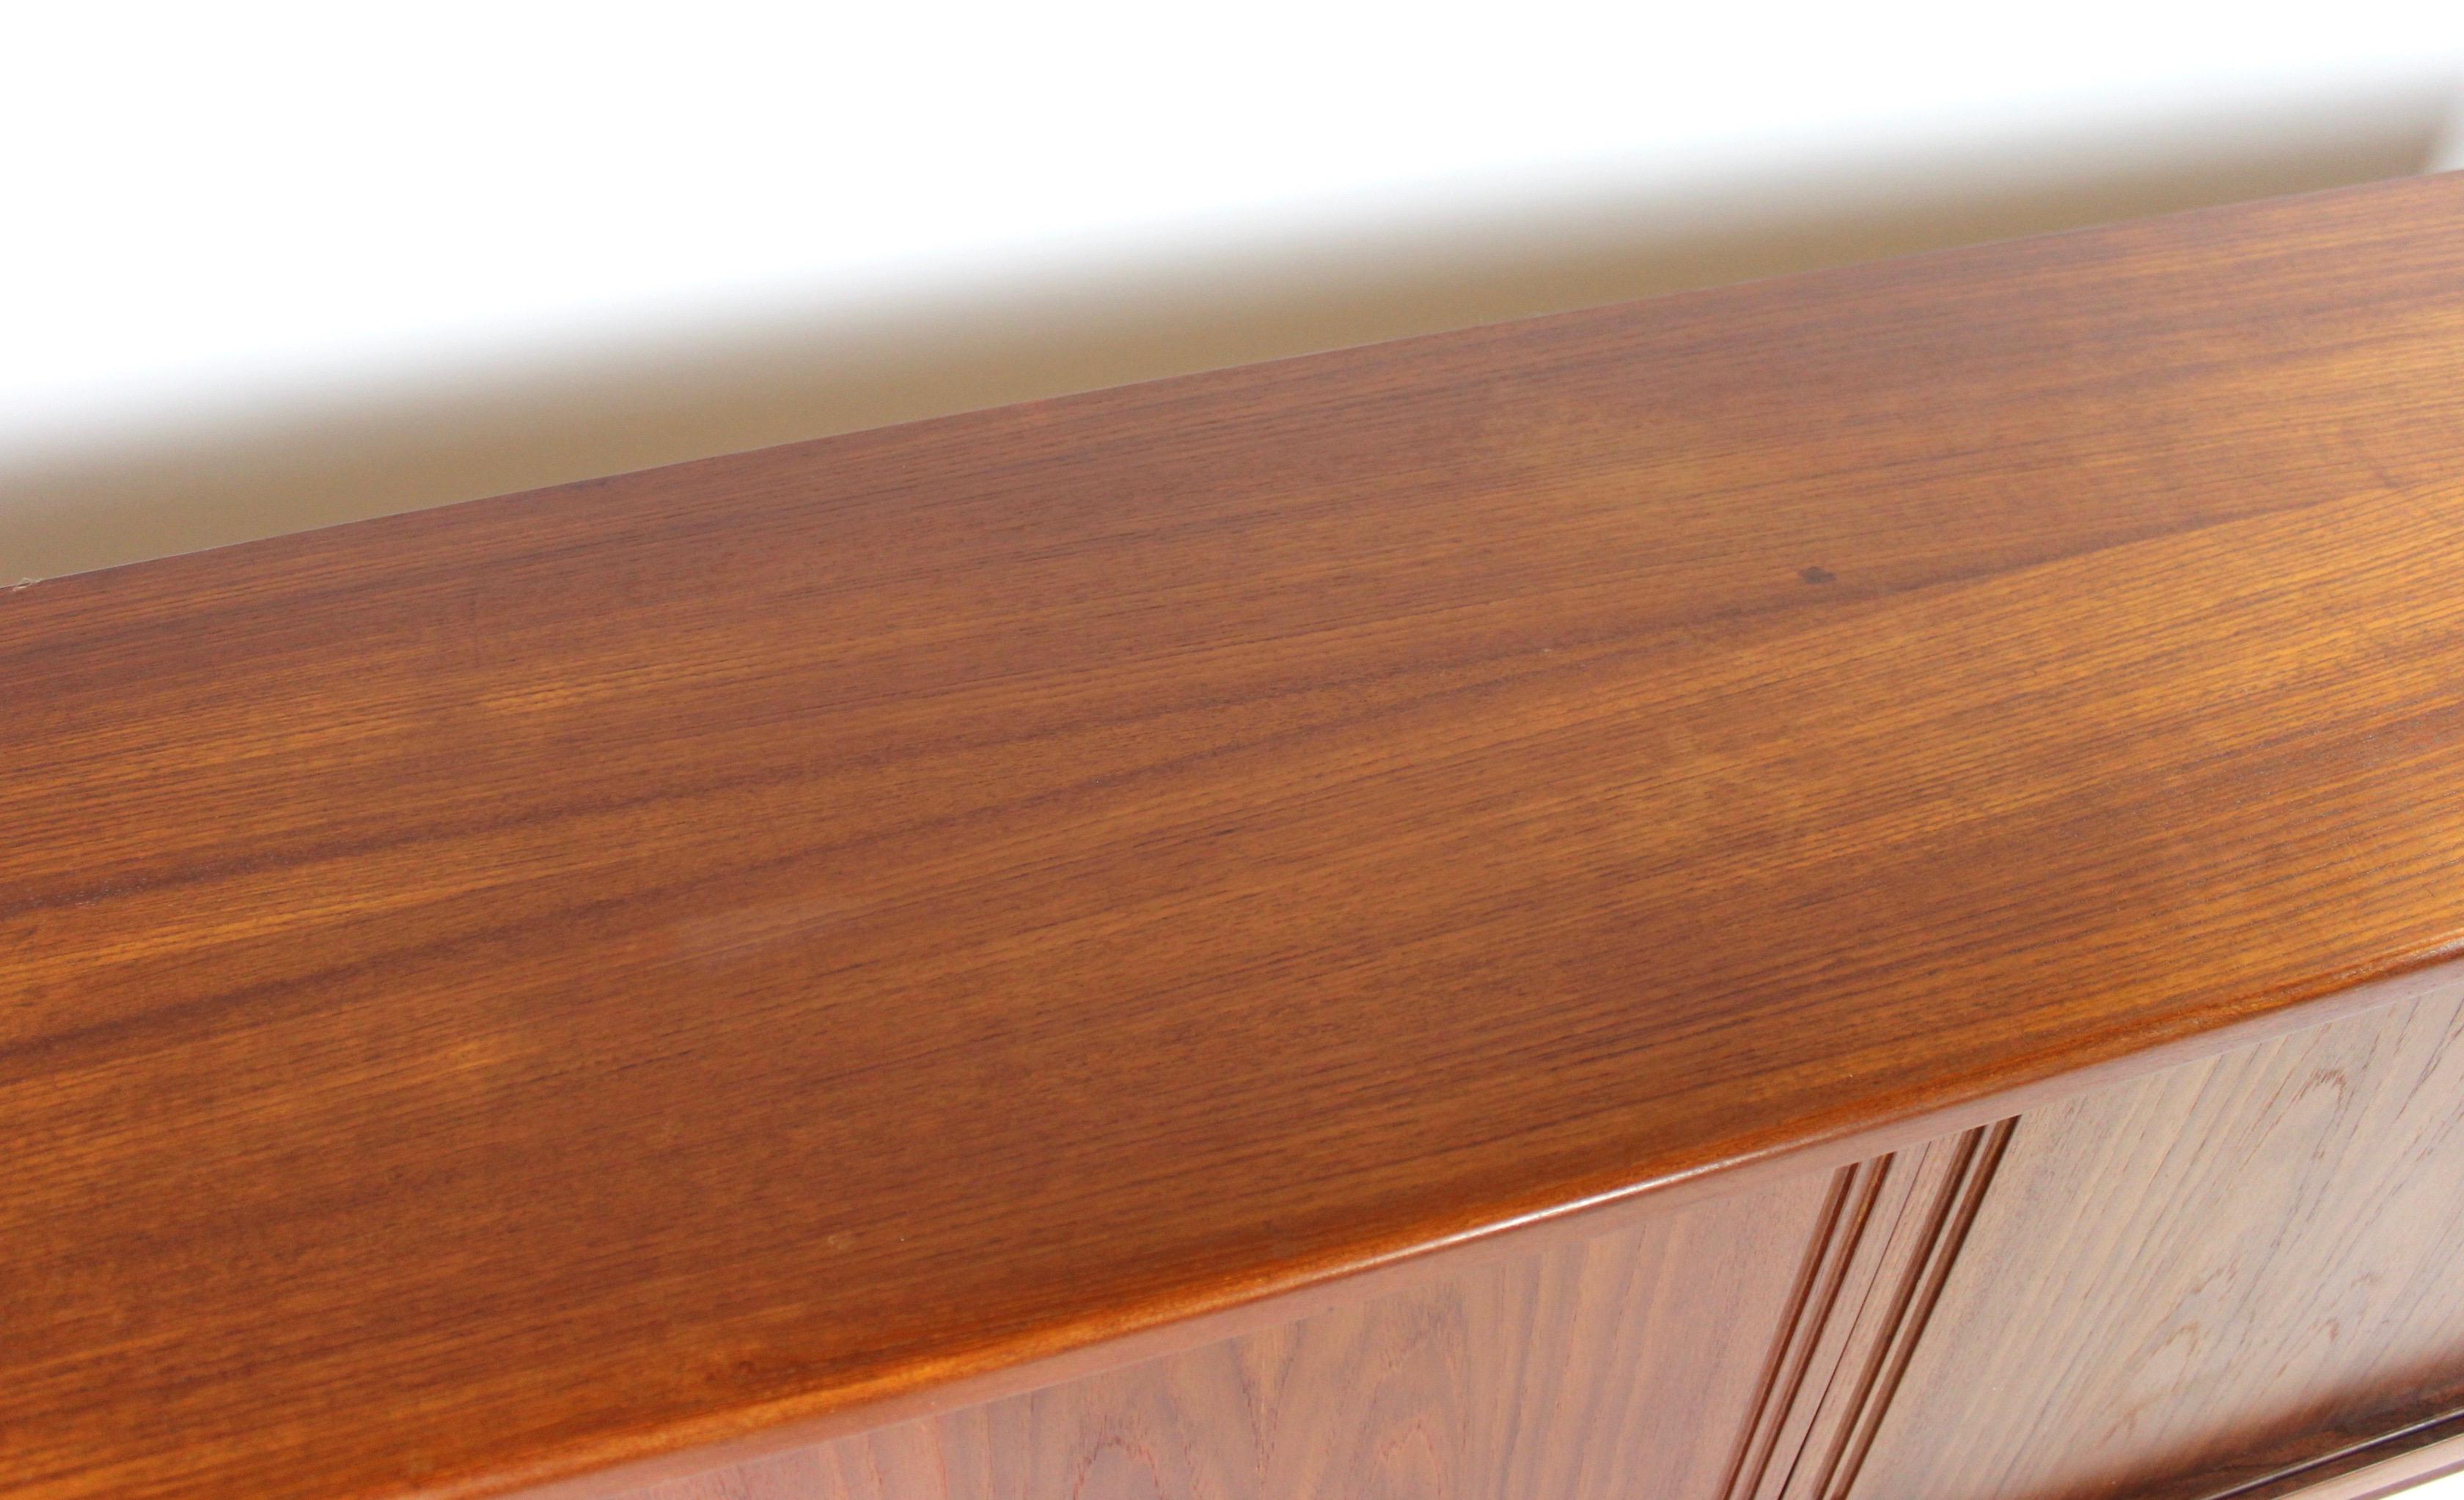 Sideboard in Teak of Danish Design from the 1960s For Sale 1